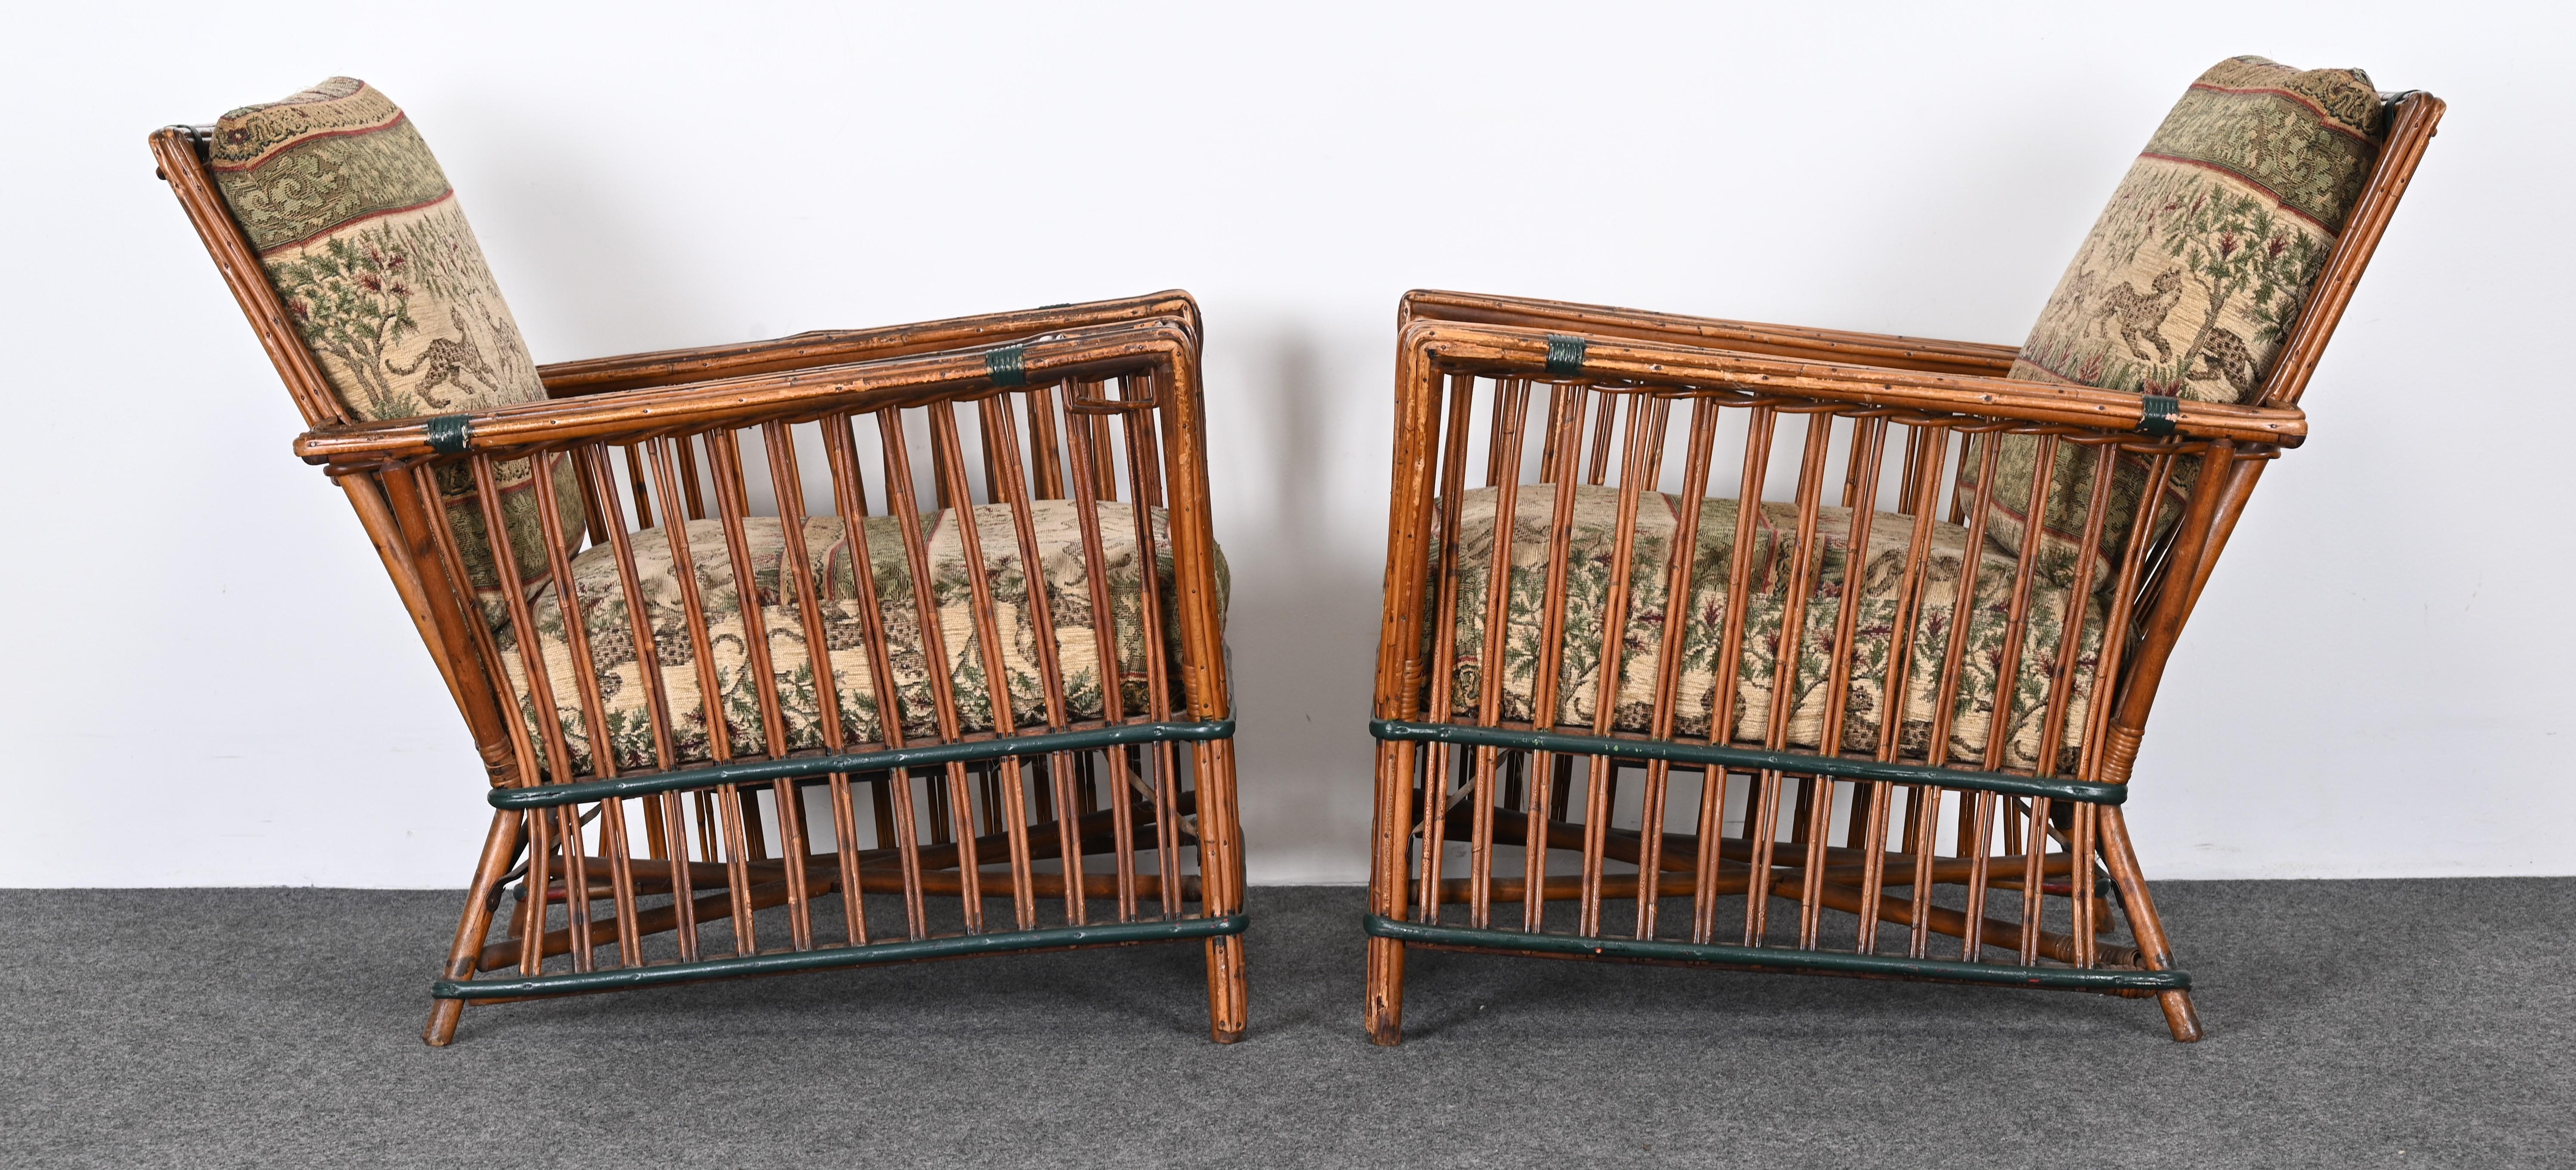 Art Deco Split Ypsilanti Stick Reed Wicker or Sofa with Pair Arm Chairs c. 1930s For Sale 5